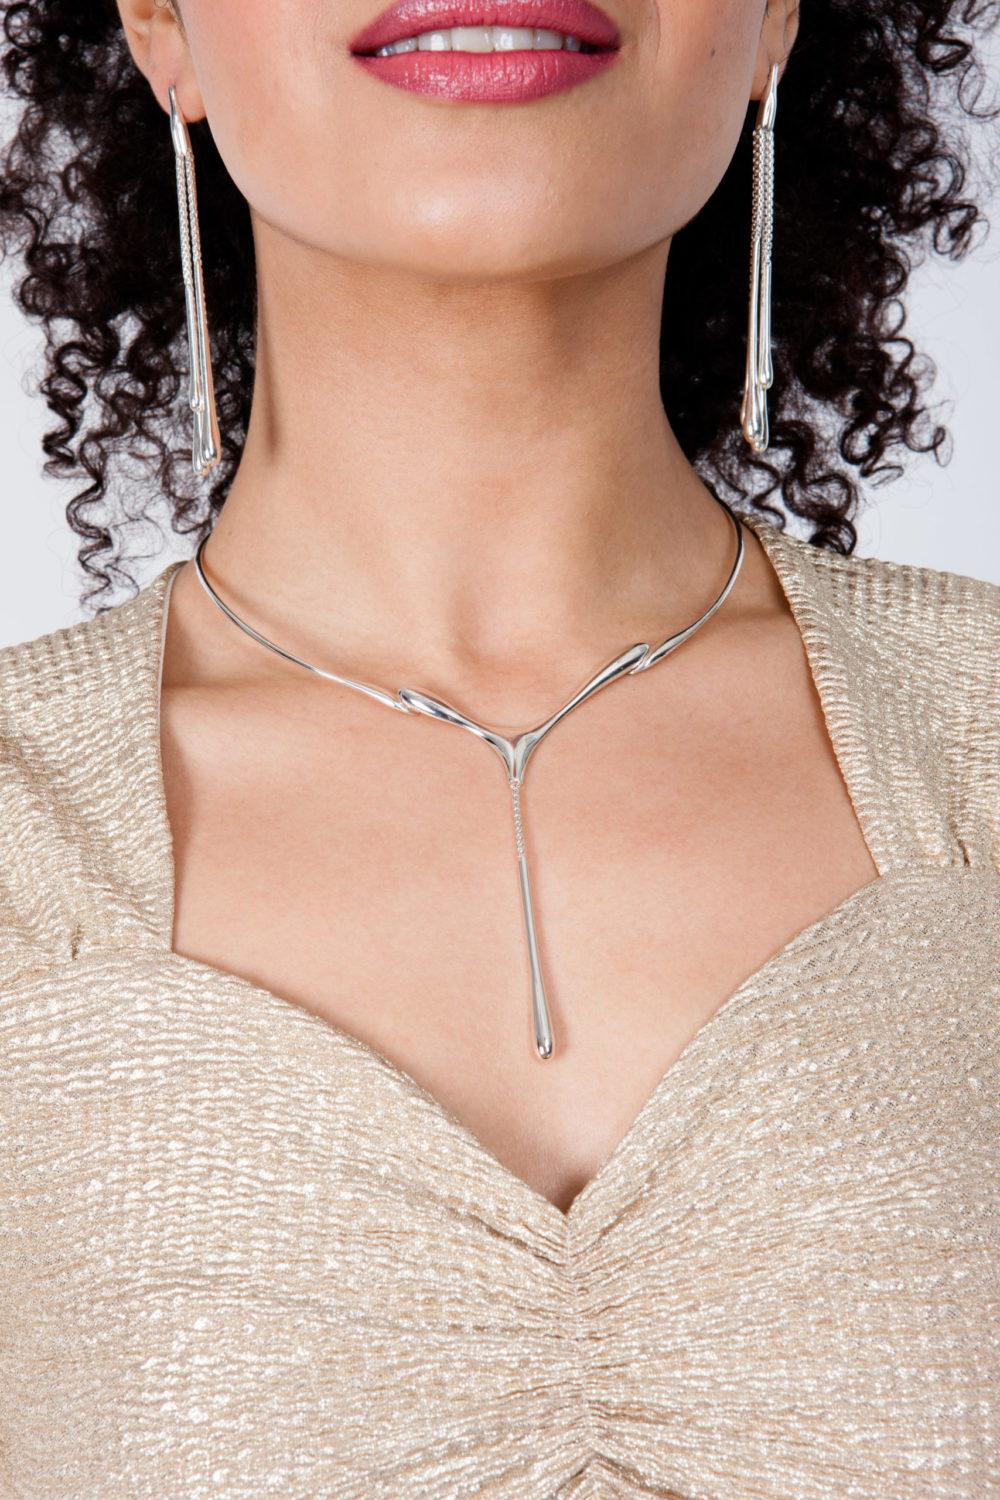 Elegant piece from the Drop collection. Y-shaped necklace of solid Sterling Silver featuring large drop dangling from a delicate chain. Beautifully crafted to give flowing fluid movement. You can have it in Rose Gold too so let us know once you